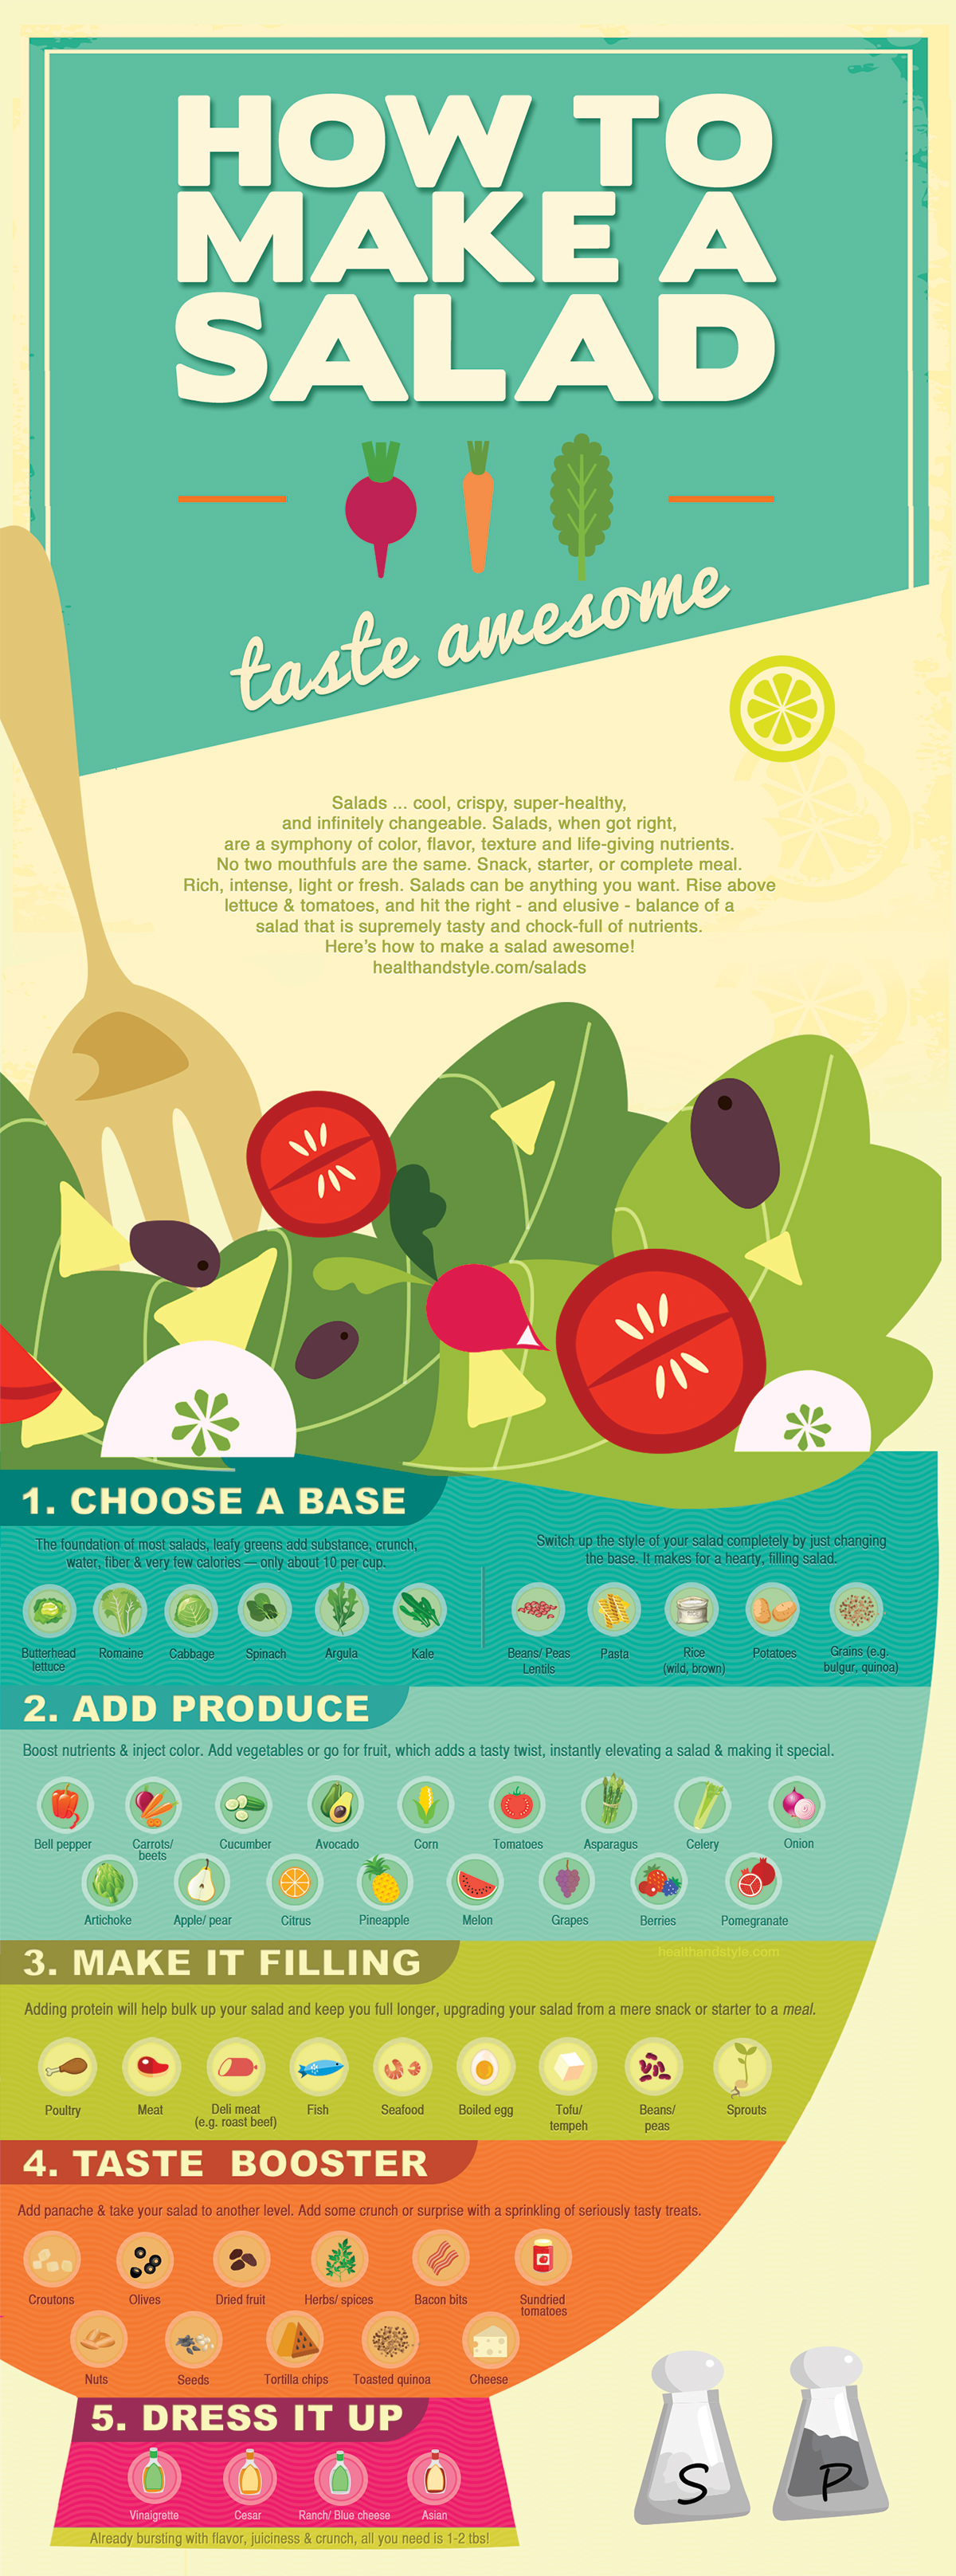 How To Make A Salad Guide To Making A Healthier Salad